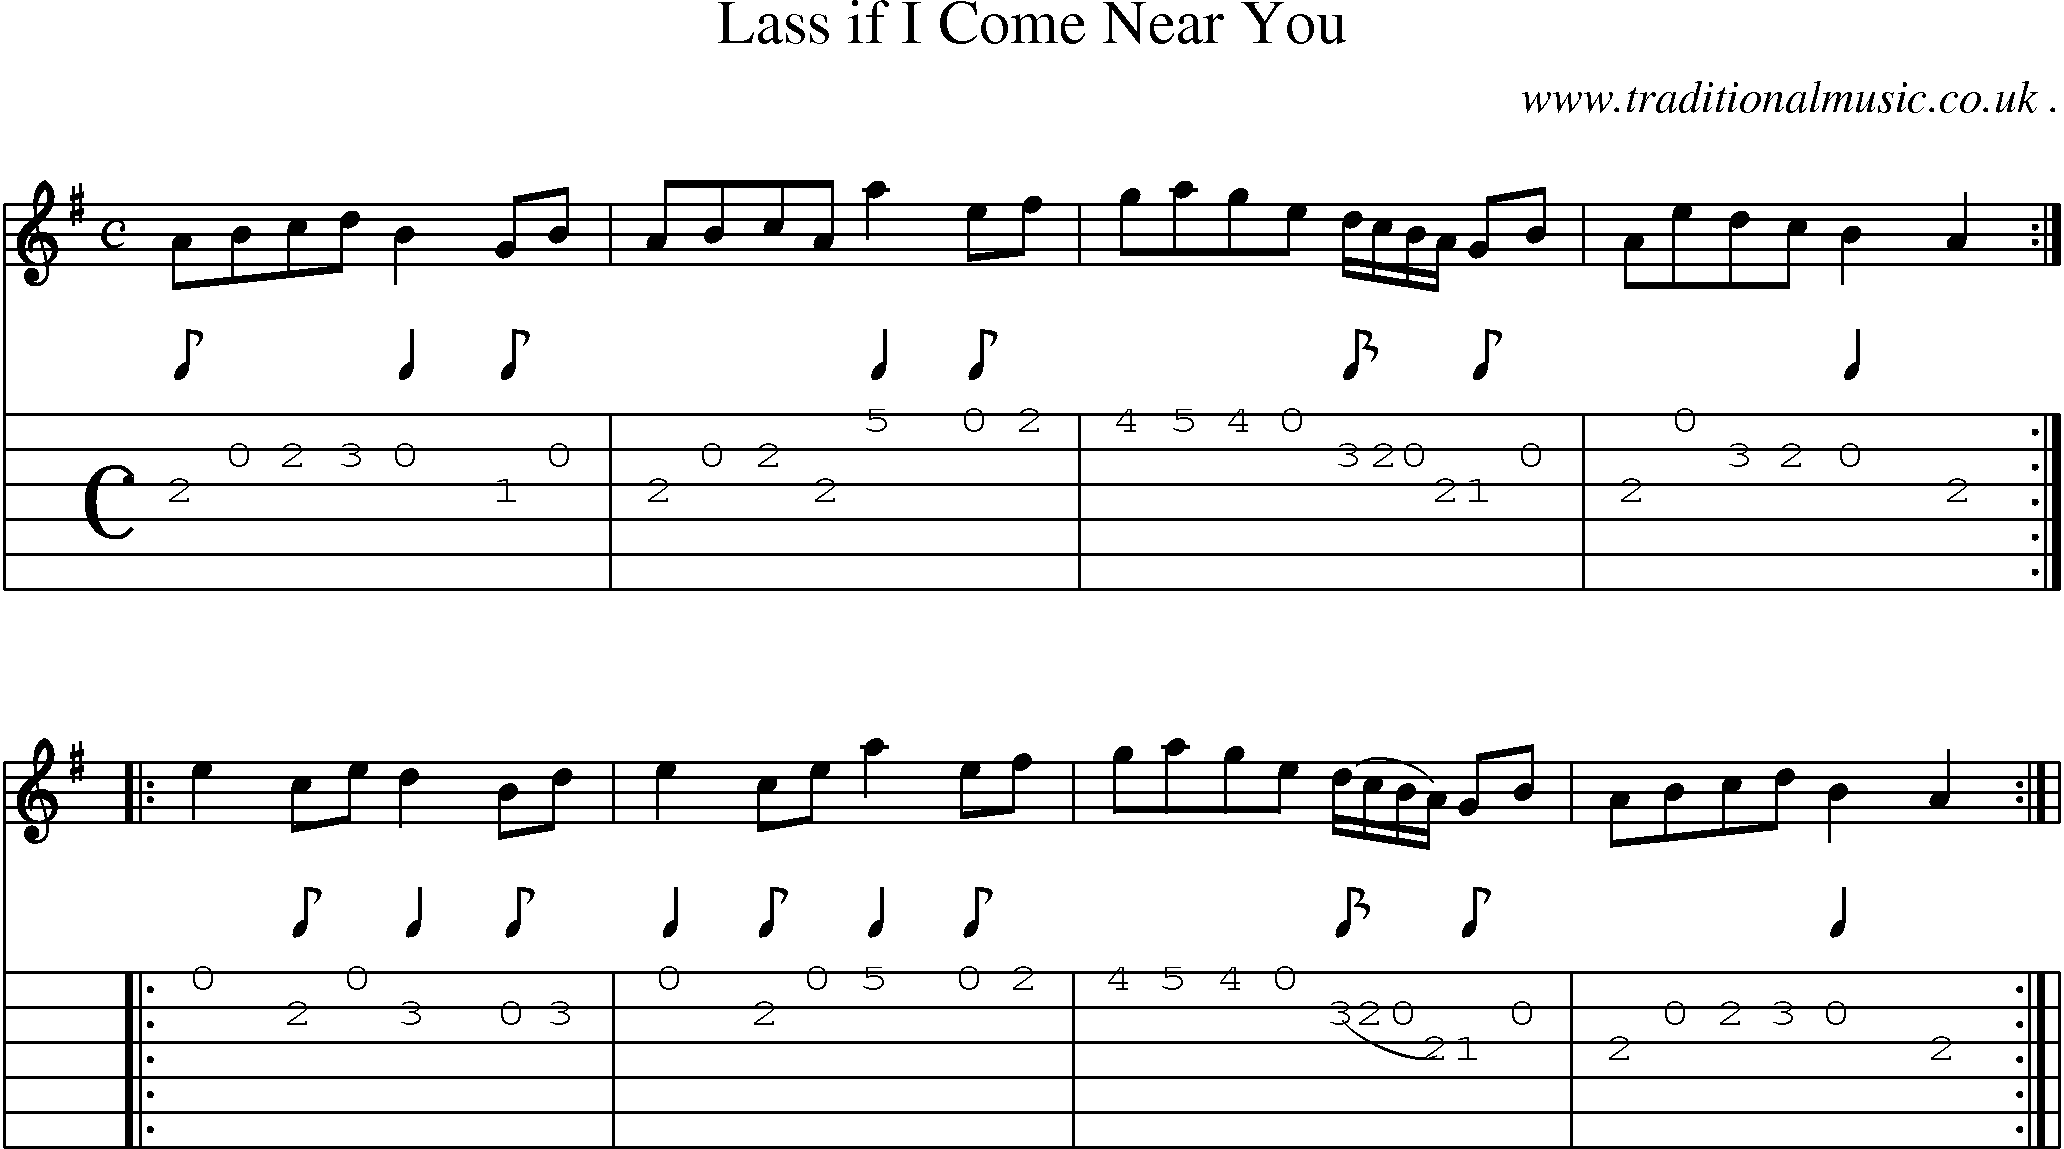 Sheet-Music and Guitar Tabs for Lass If I Come Near You